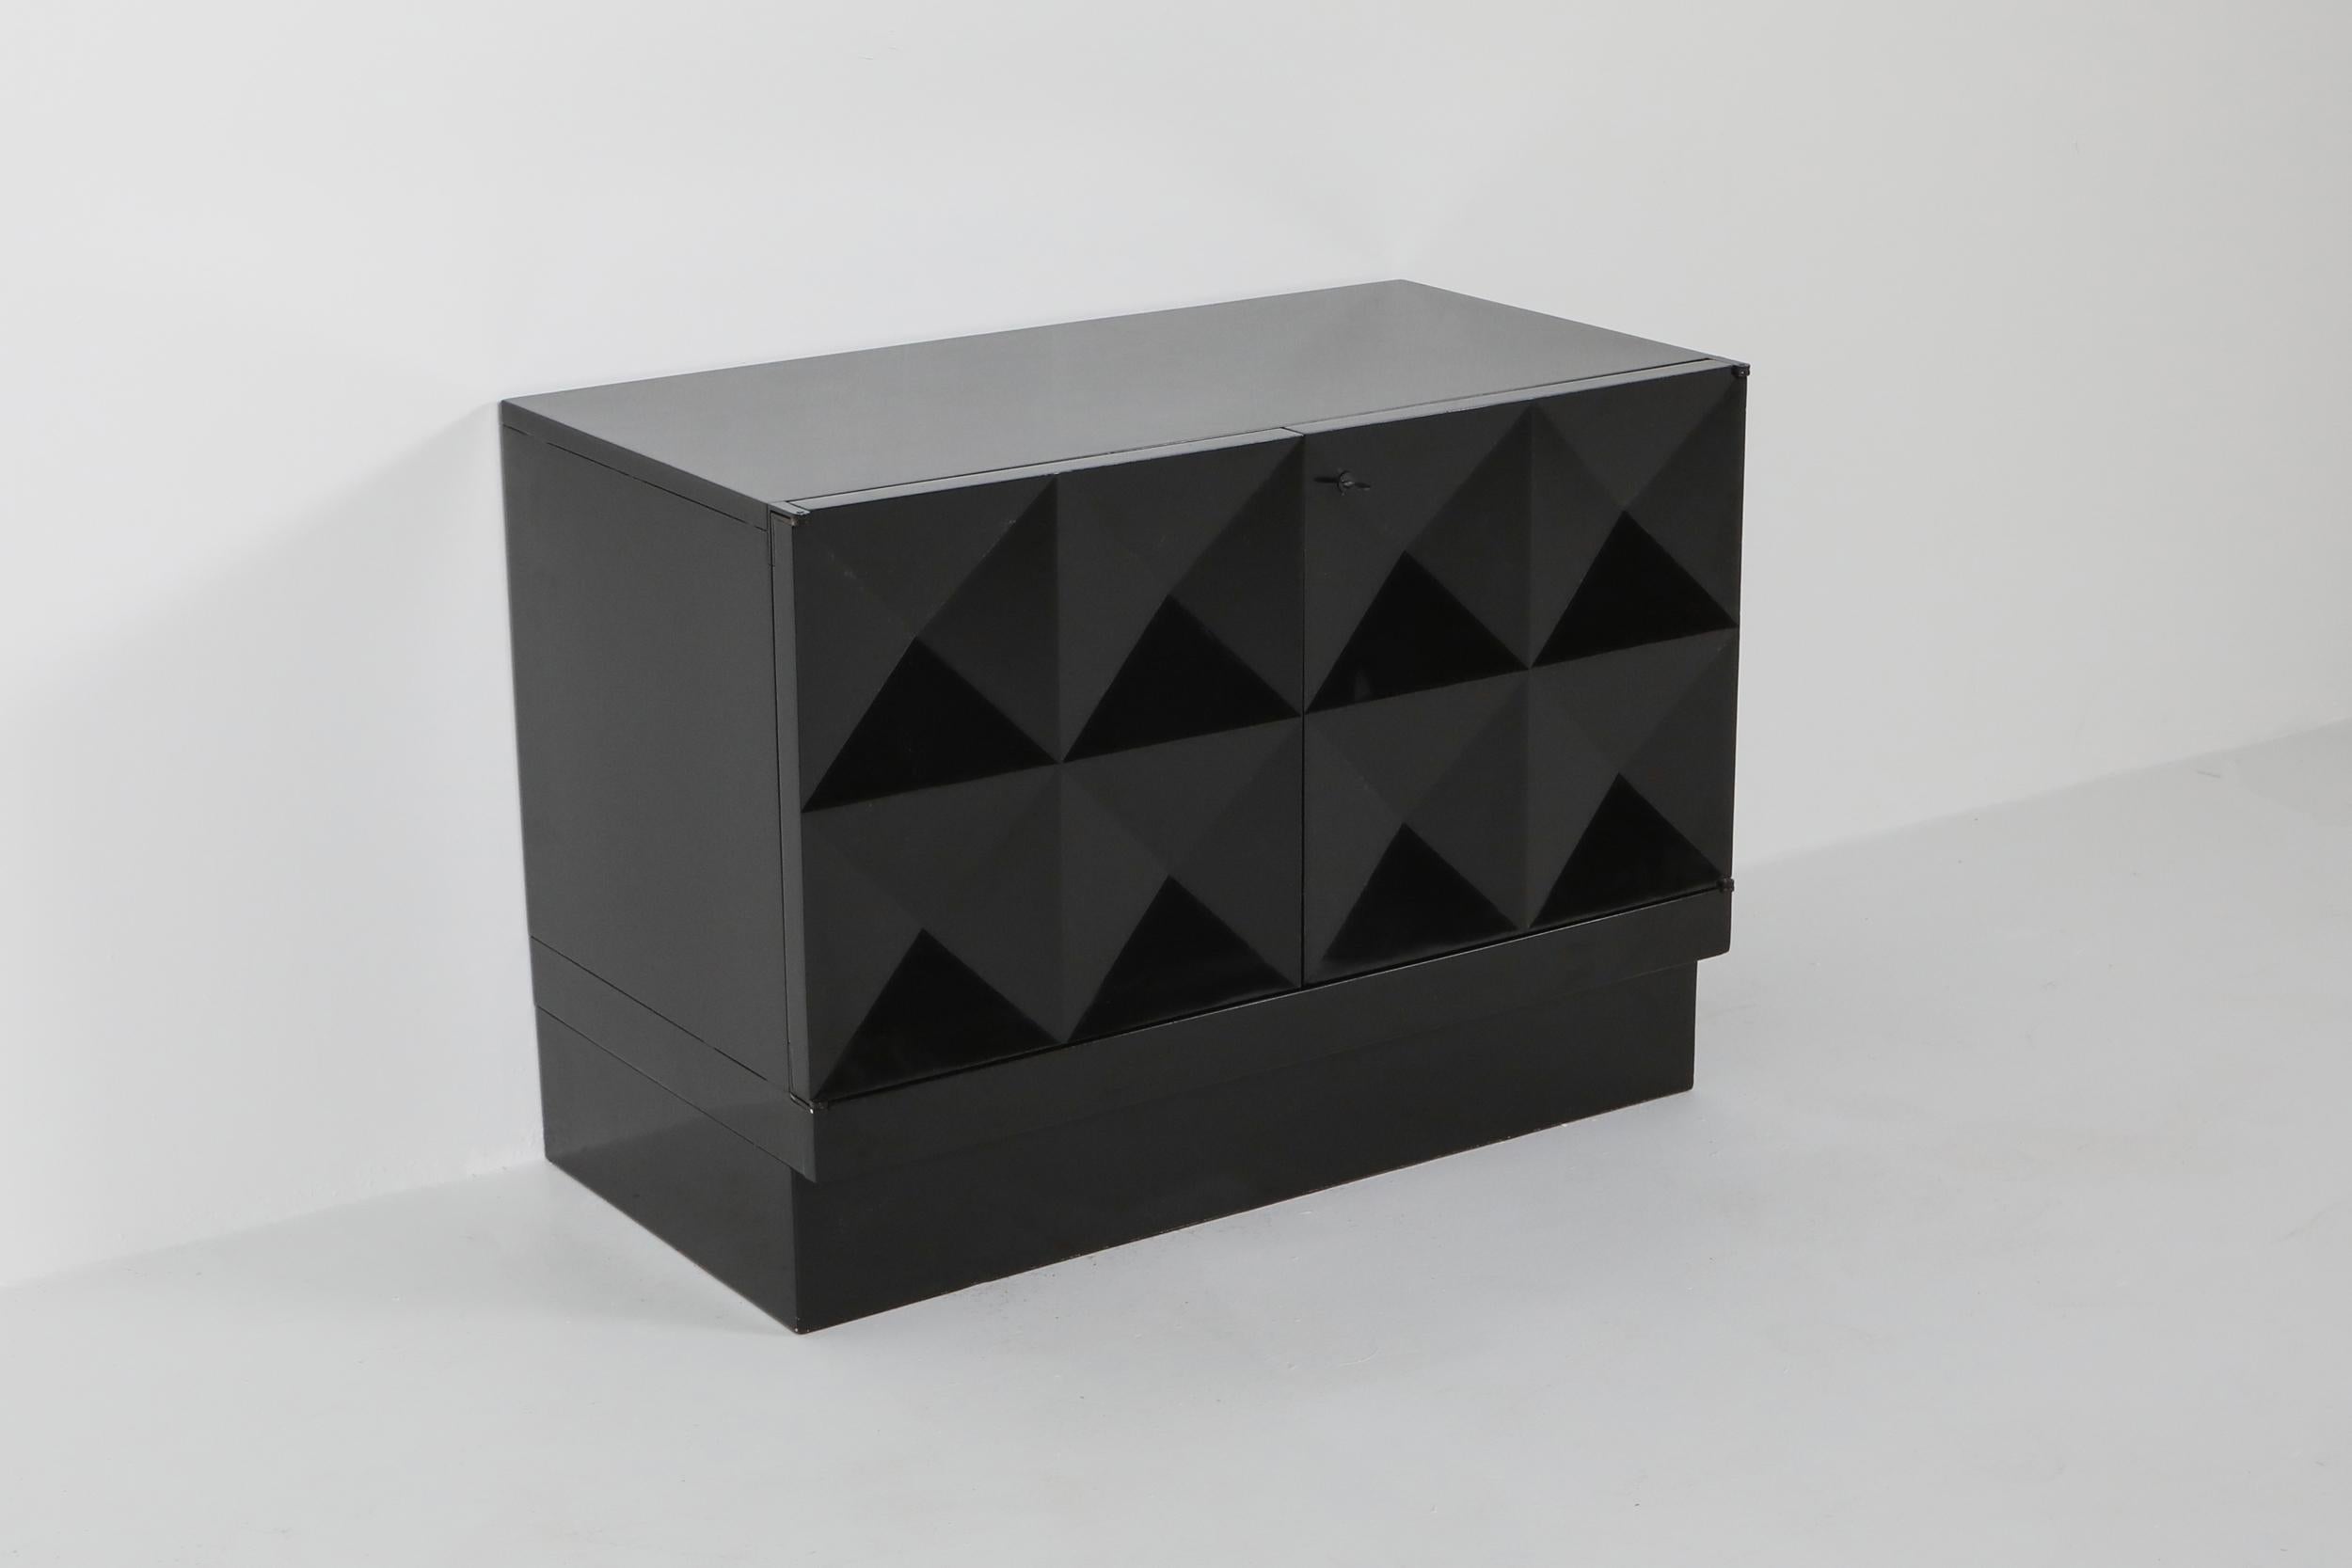 20th Century Brutalist Cabinet in Black Lacquer with Graphic Door Panels